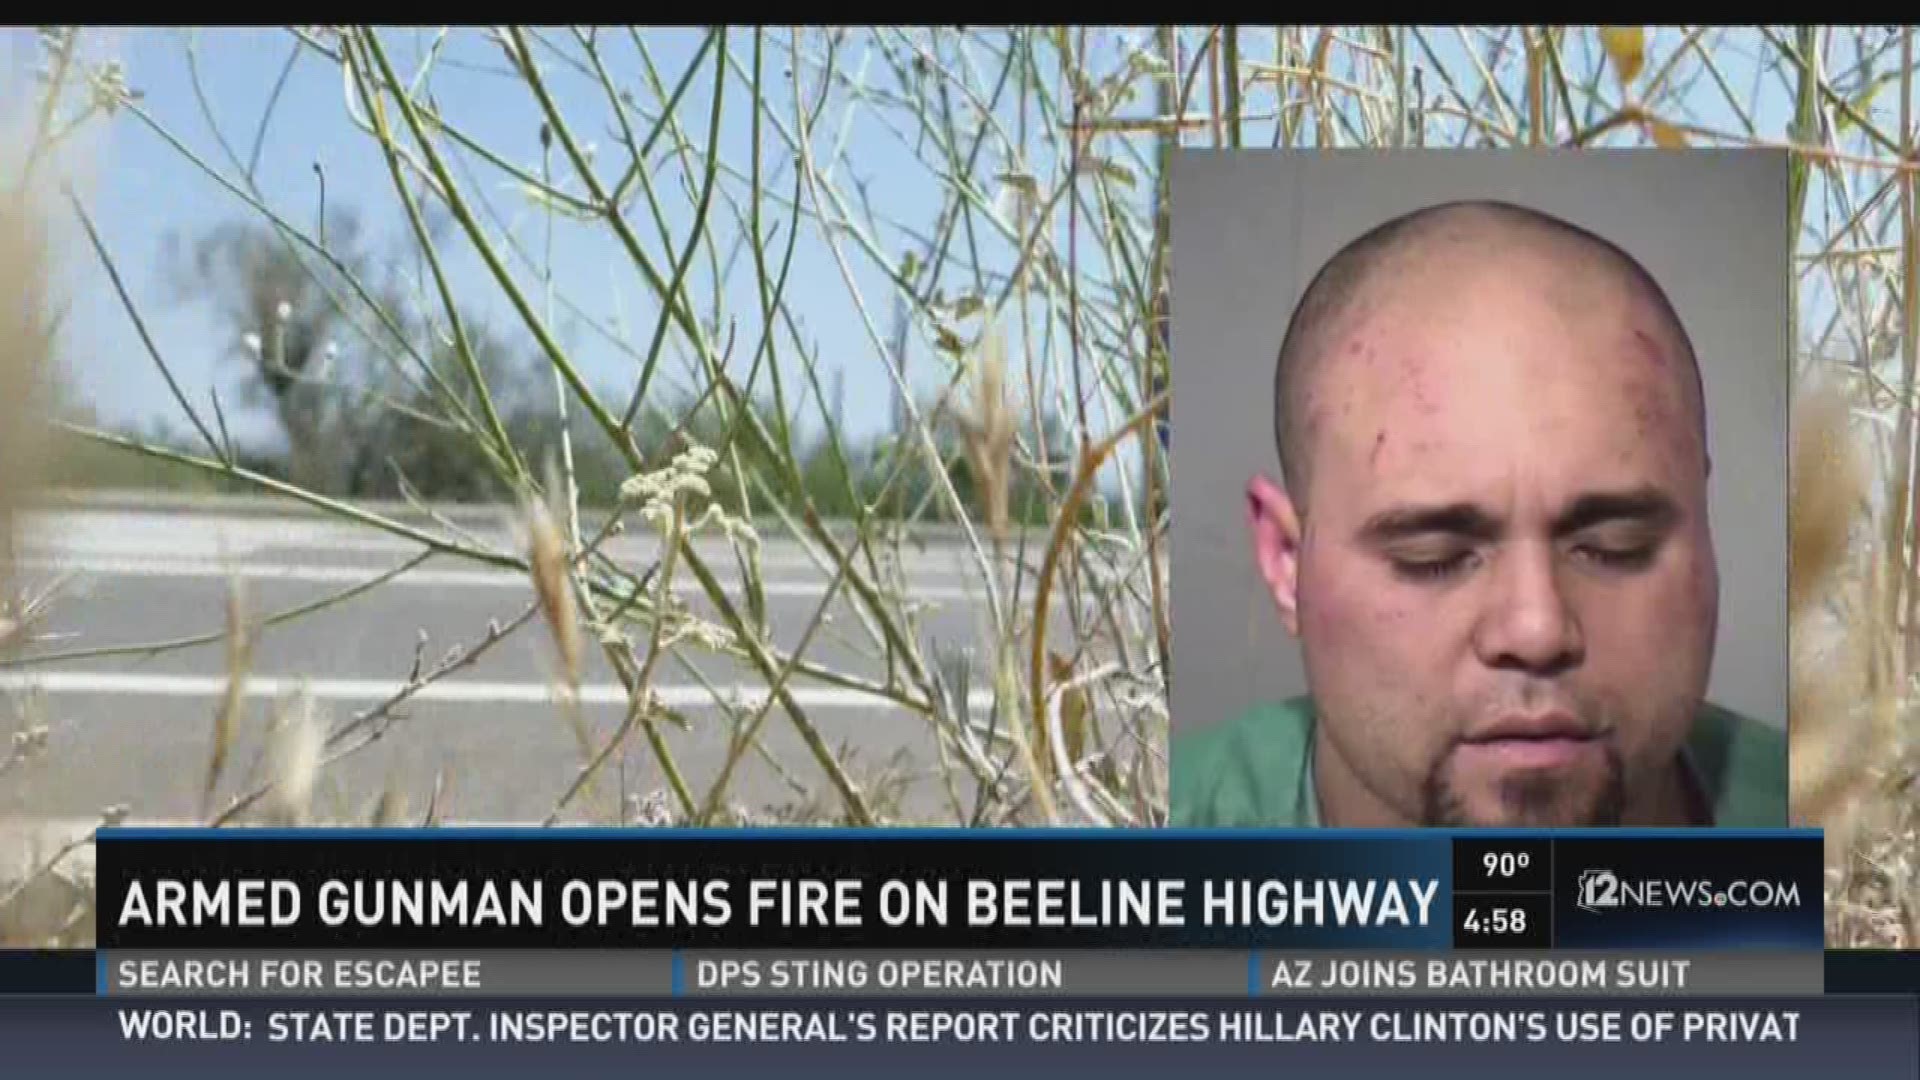 The beeline highway has been reopened after a suspect went on a shooting spree